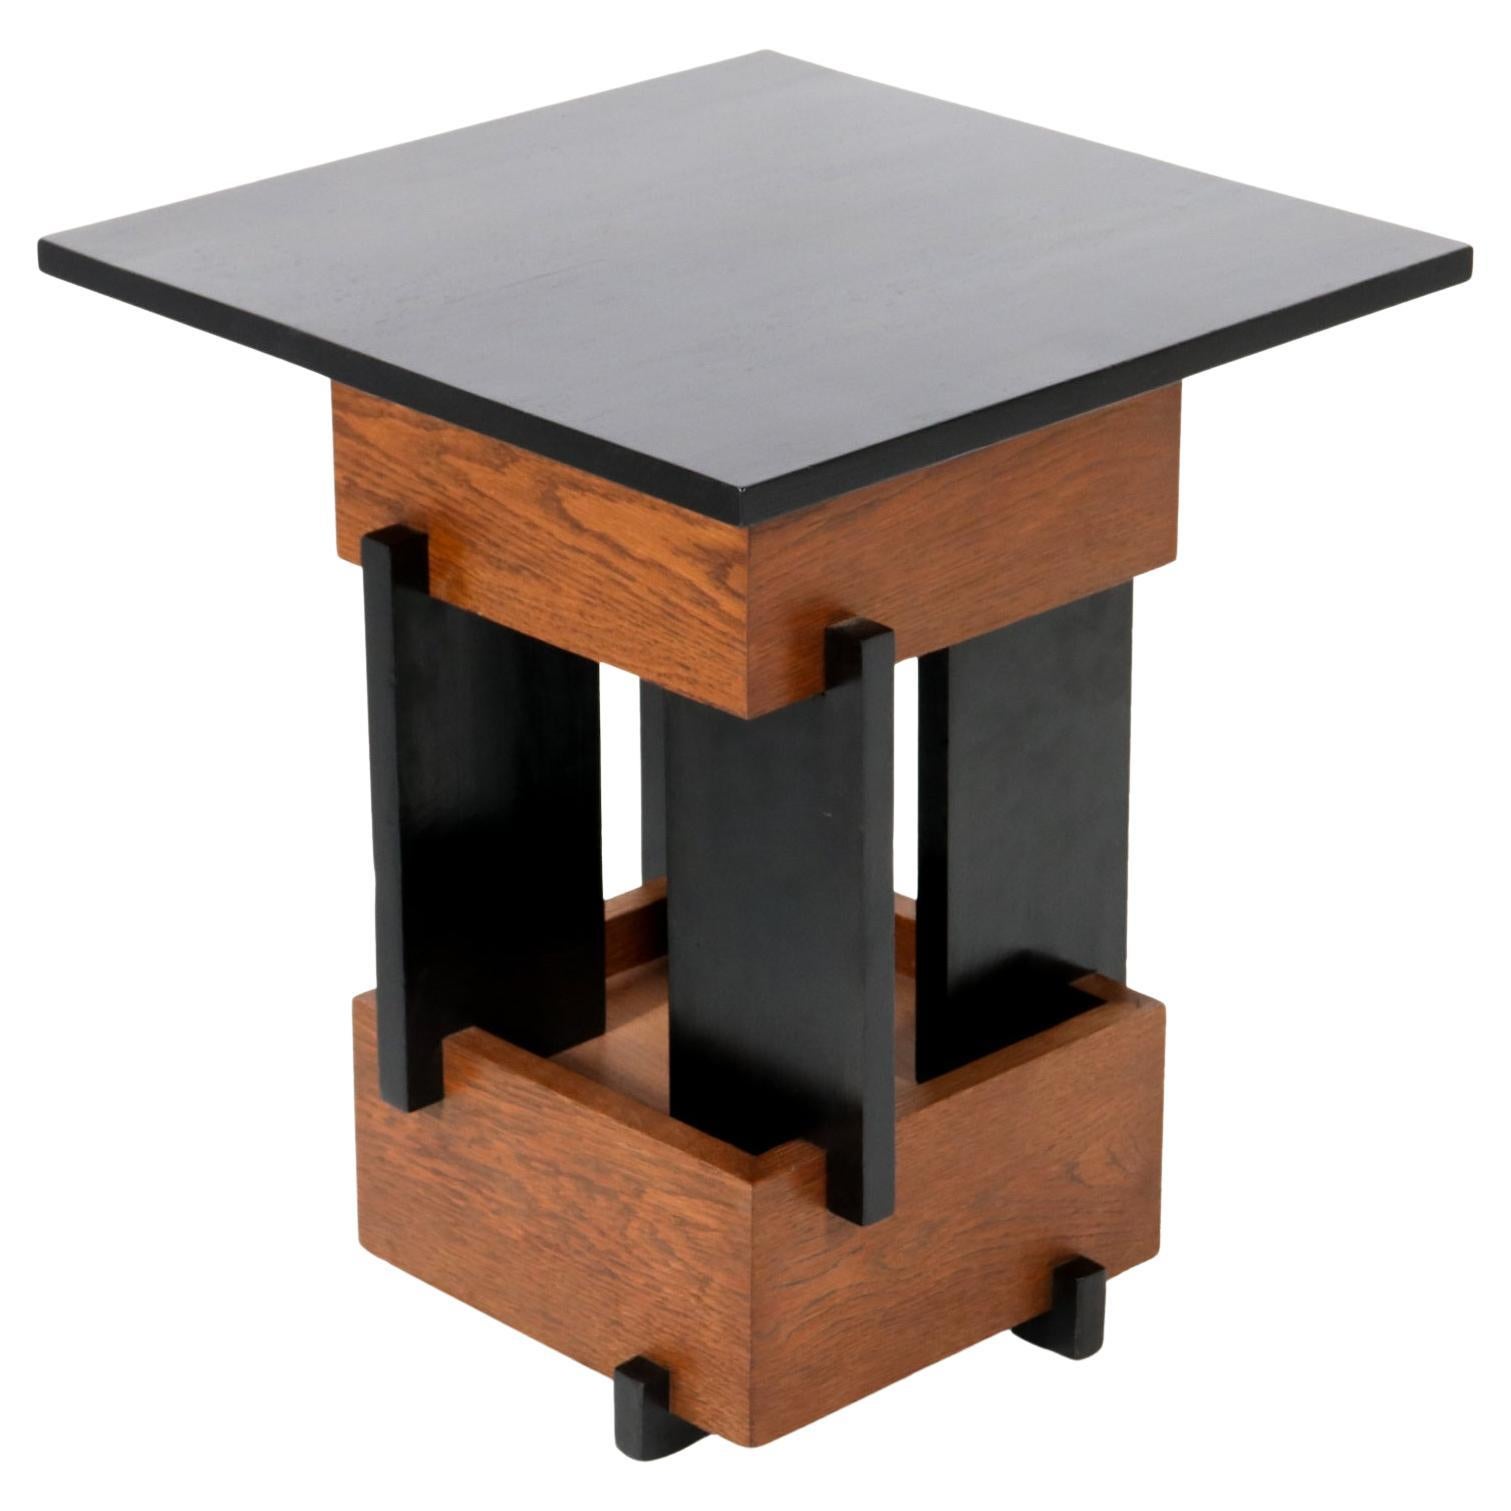 Oak Art Deco Modernist Side Table by Cor Alons, 1930s For Sale at 1stDibs